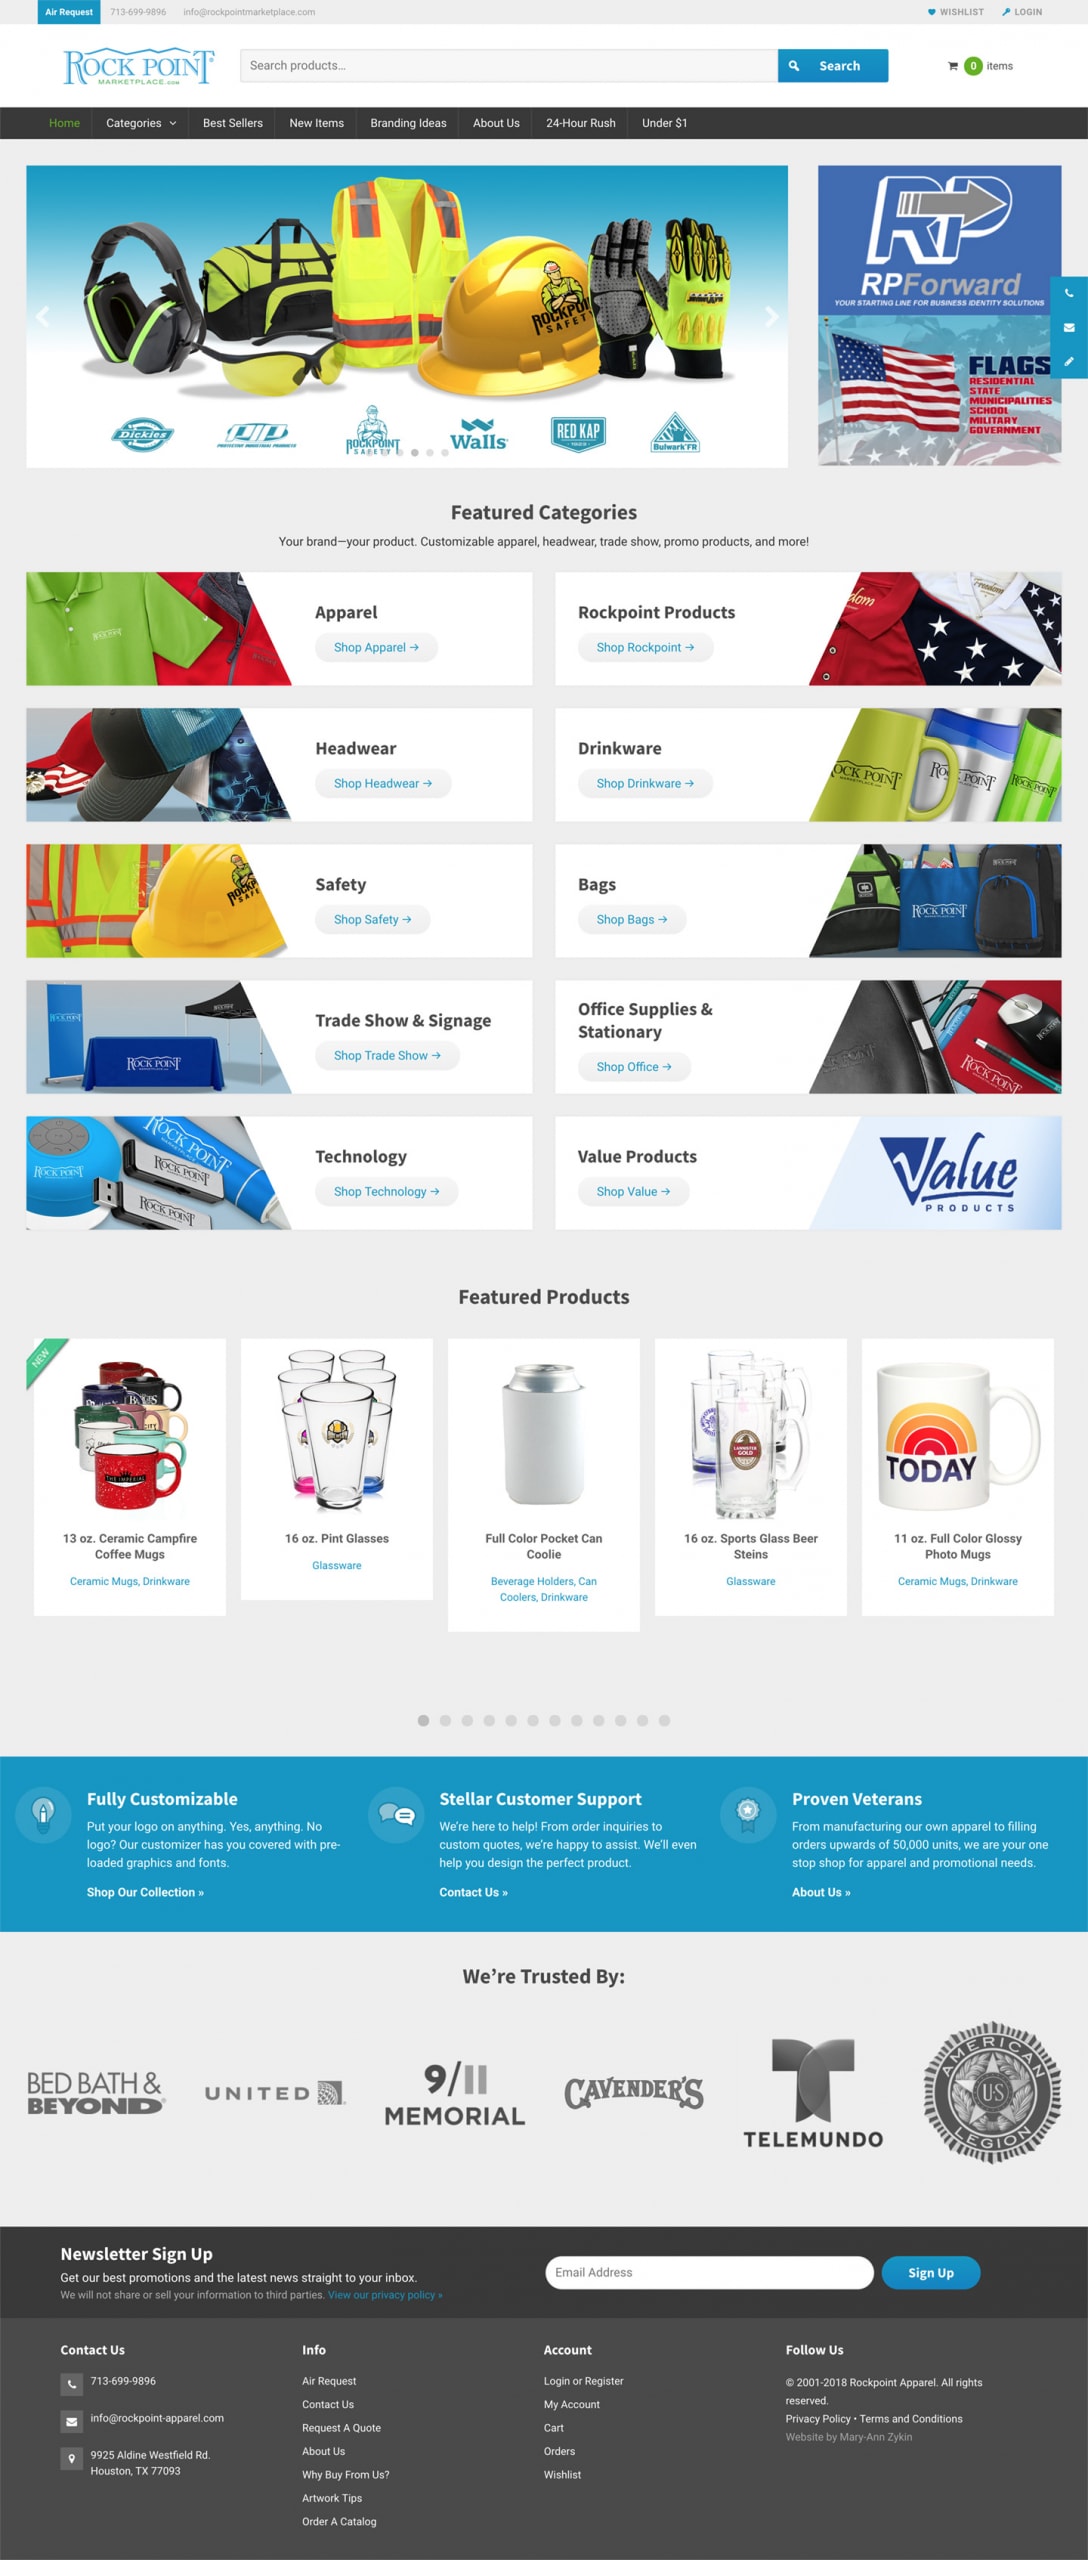 Rockpoint Marketplace Homepage